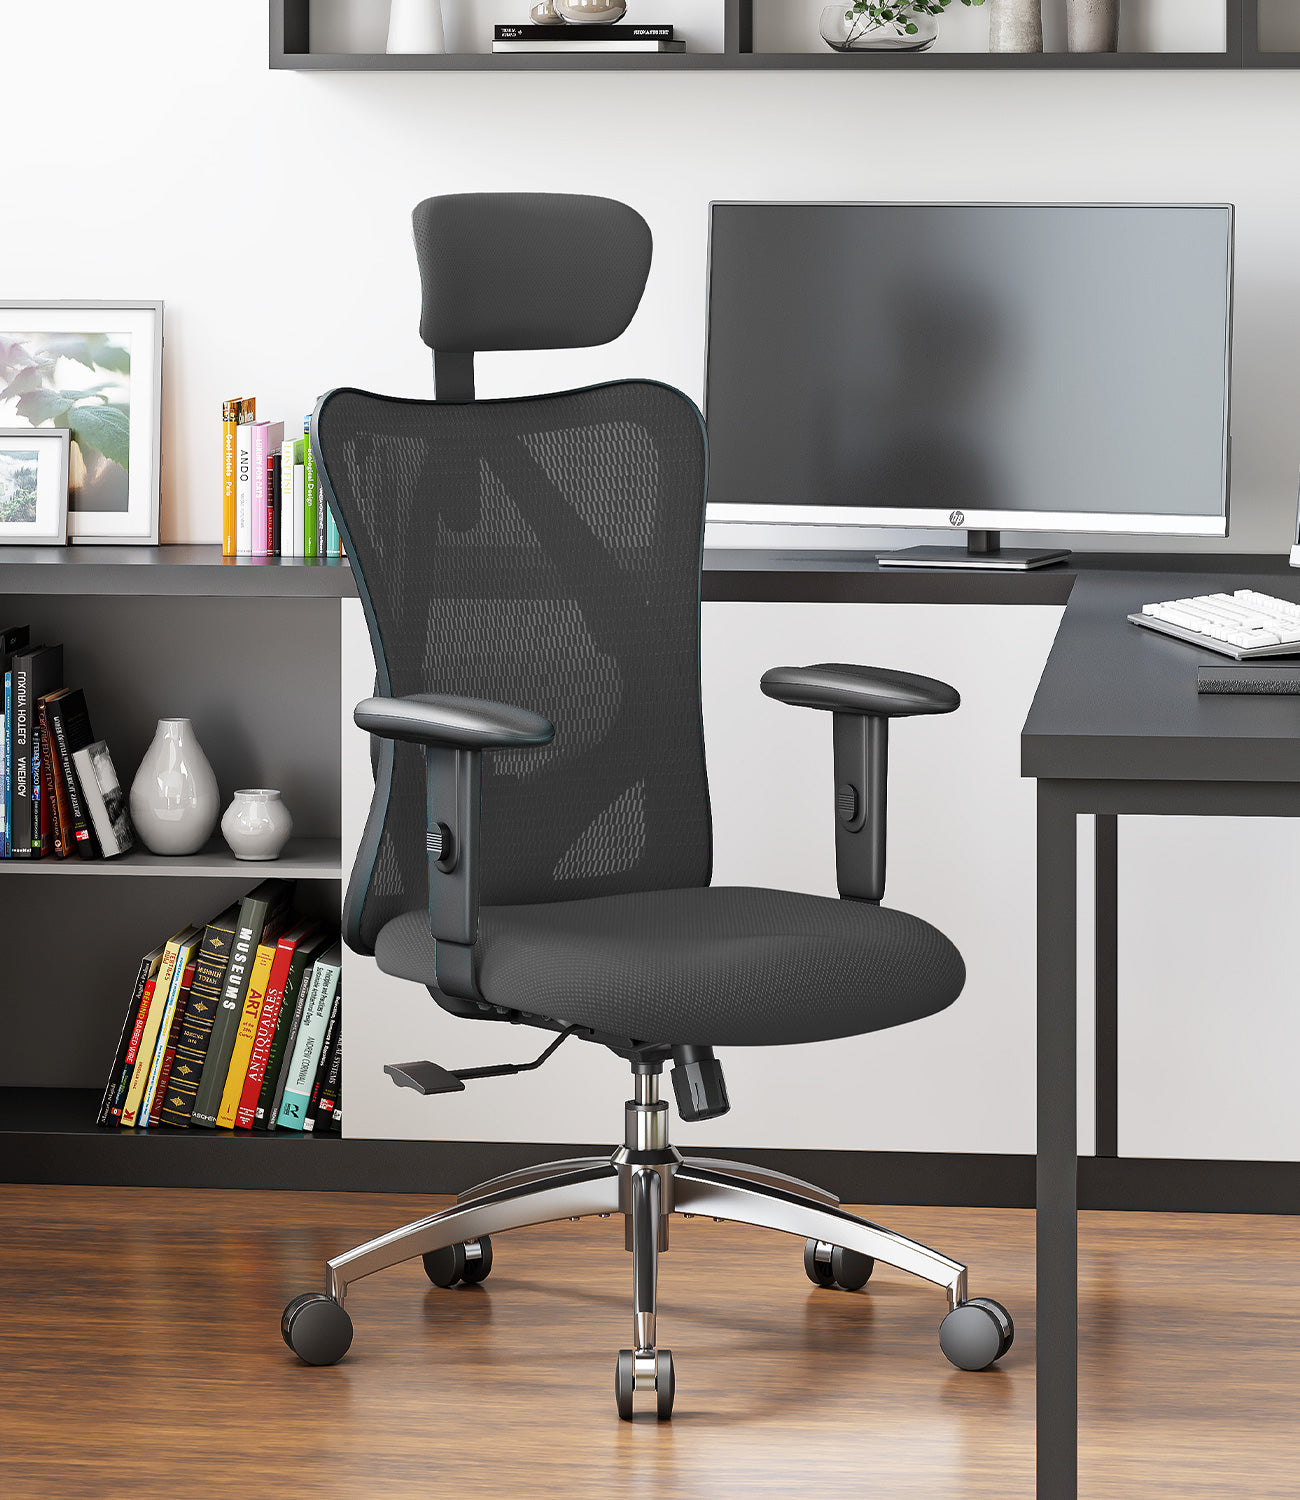 Sihoo M18 Ergonomic Office Chair review: fantastic back support for those  who need it - General Discussion Discussions on AppleInsider Forums